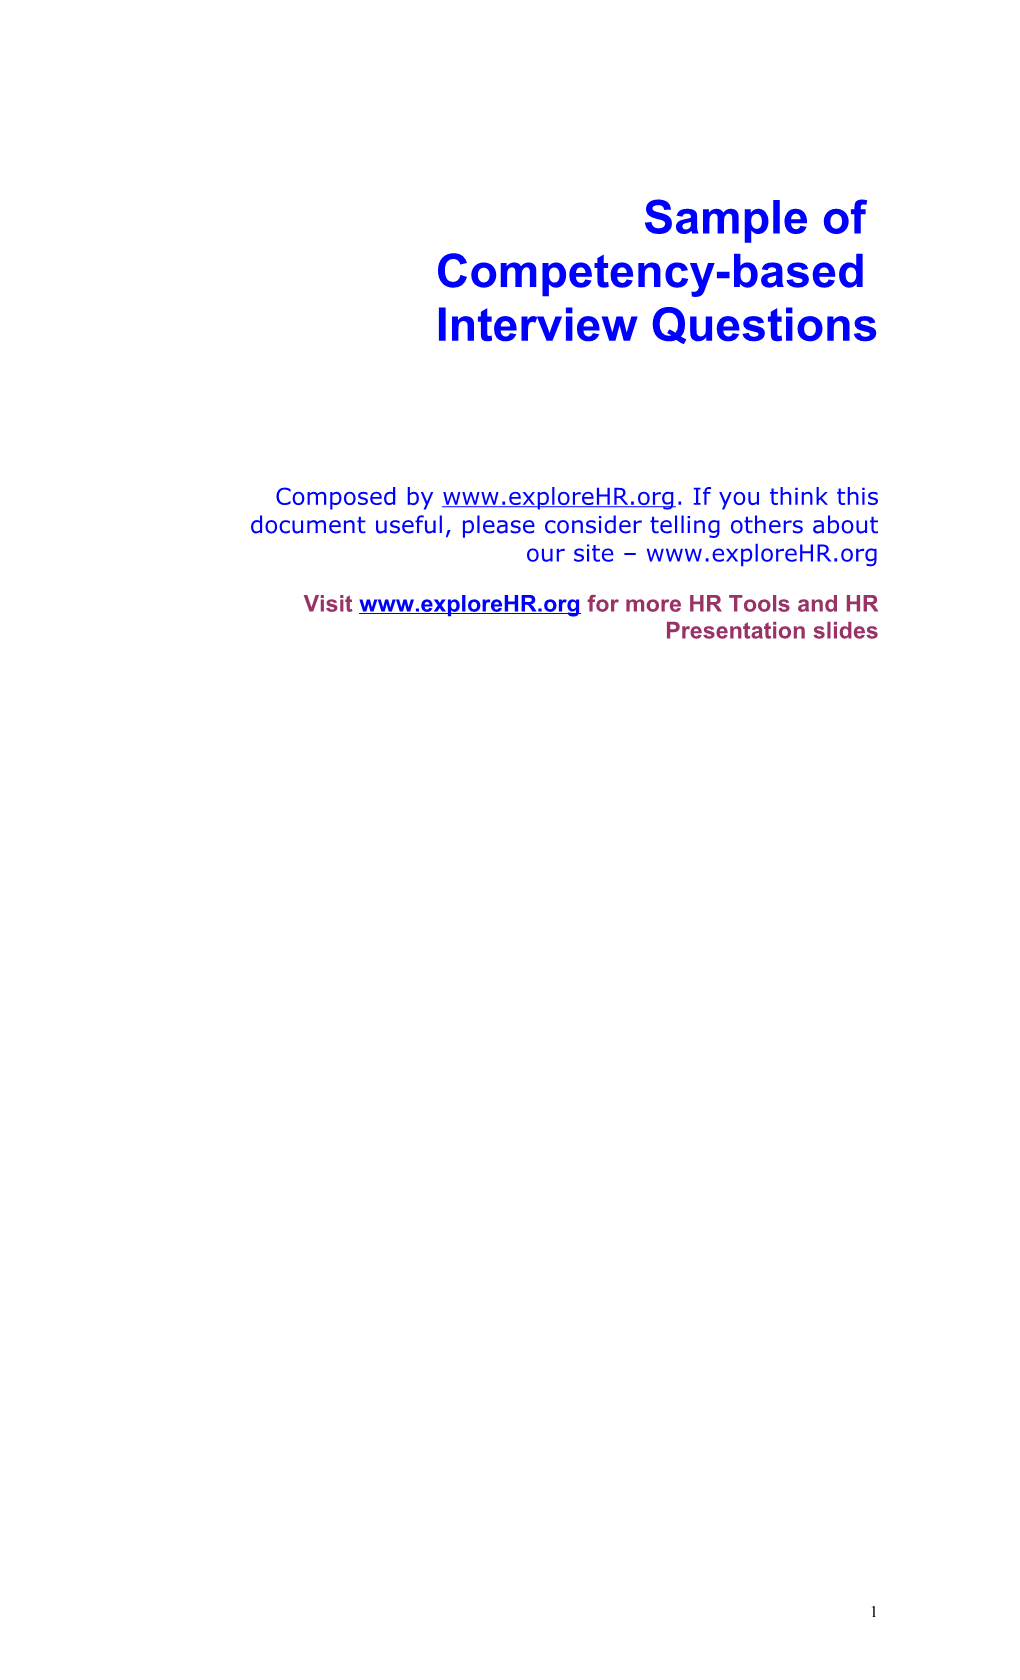 Samples of Competency-Based Interview Questions